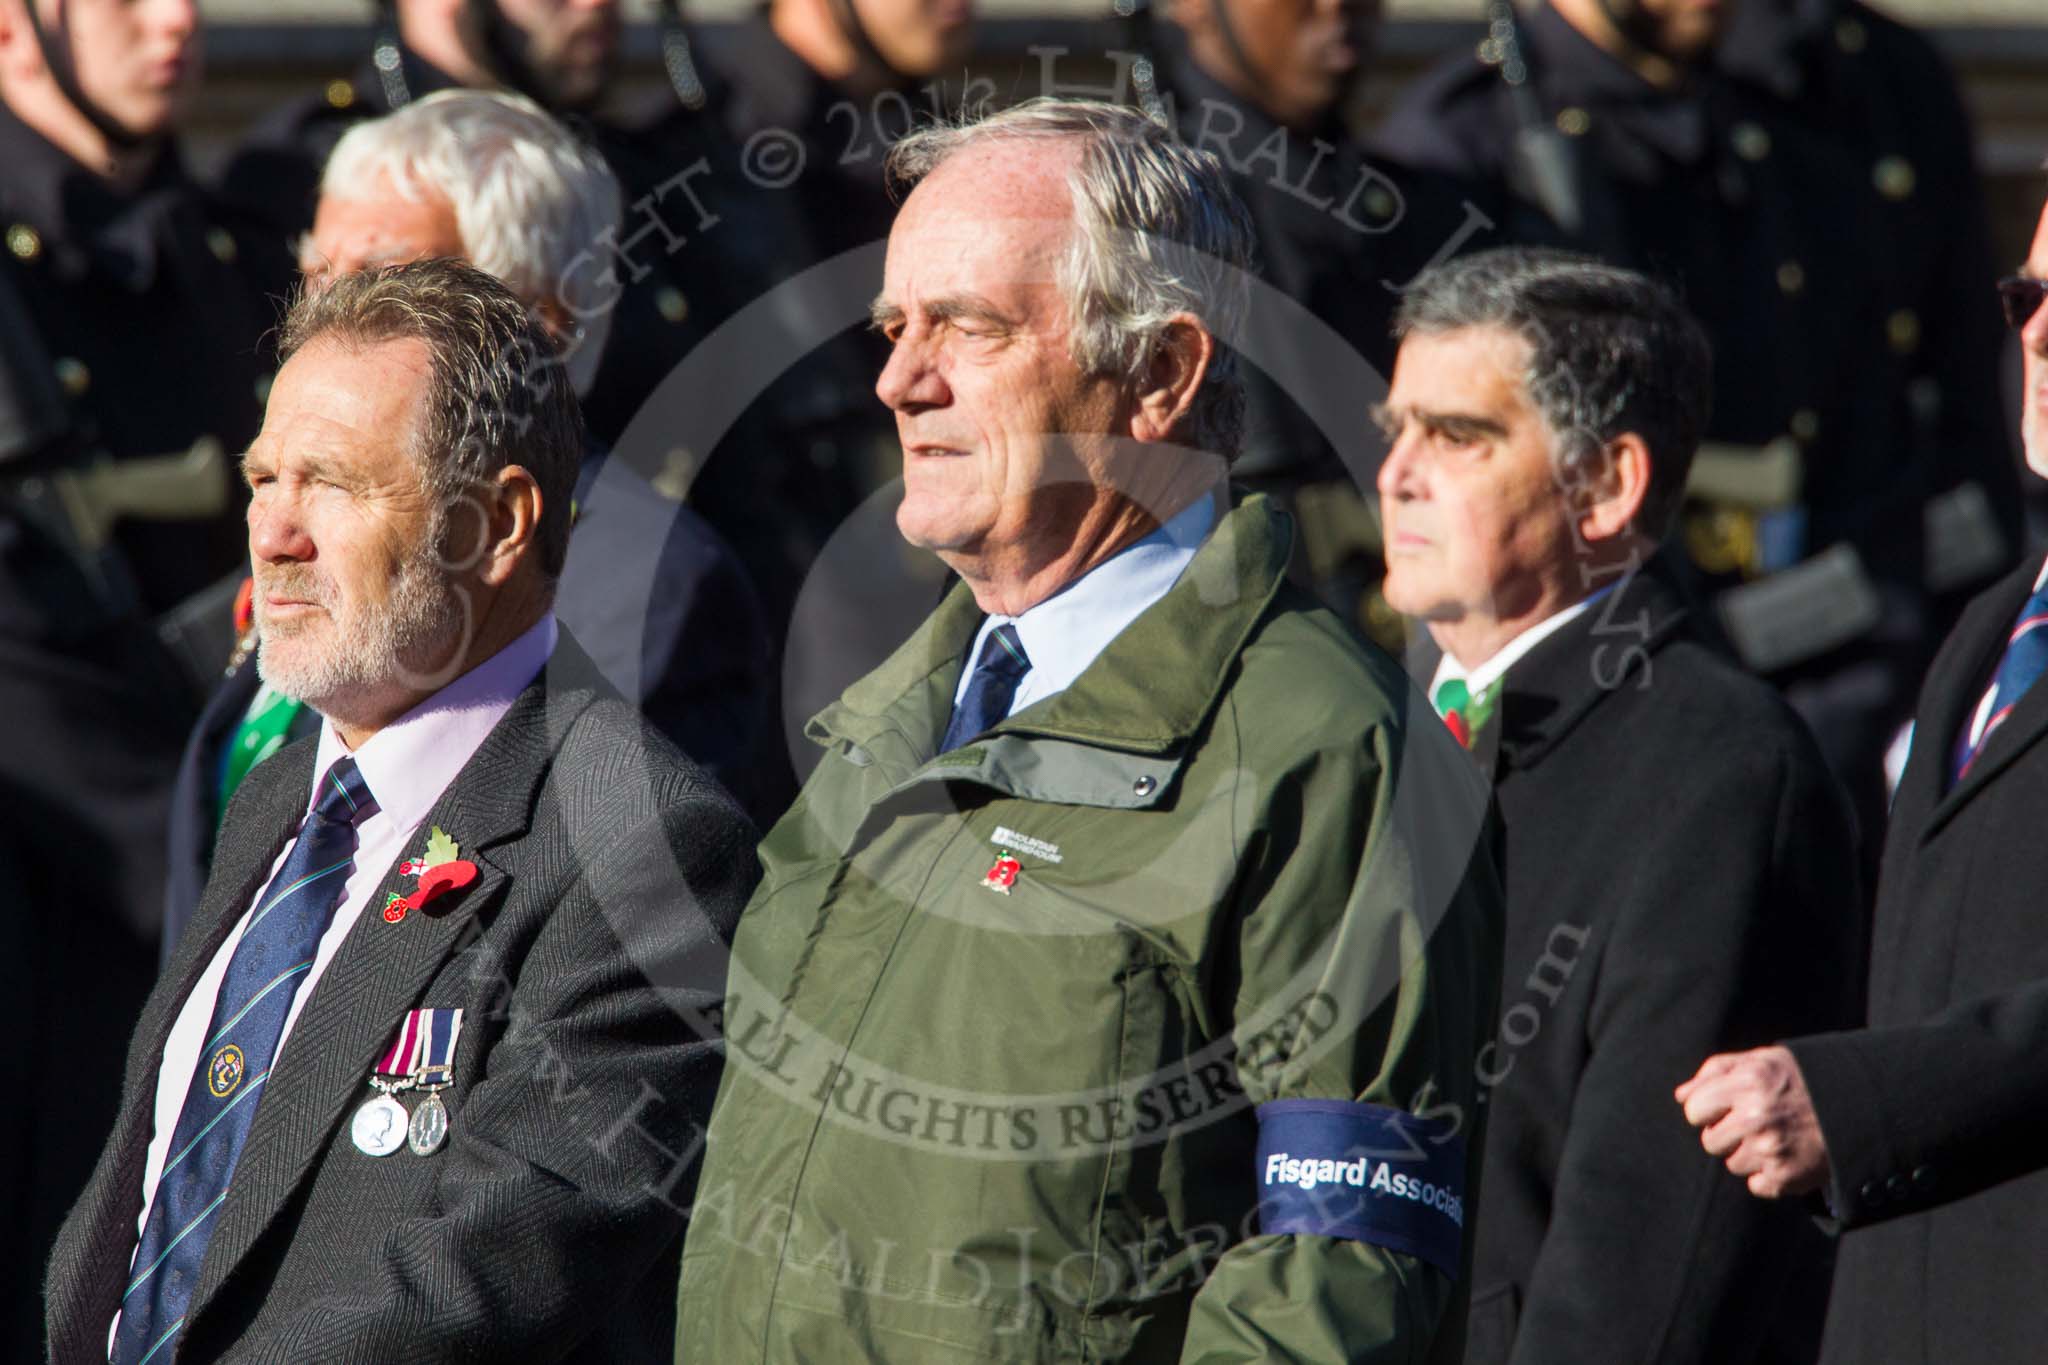 Remembrance Sunday at the Cenotaph in London 2014: Group E40 - The Fisgard Association.
Press stand opposite the Foreign Office building, Whitehall, London SW1,
London,
Greater London,
United Kingdom,
on 09 November 2014 at 11:55, image #873